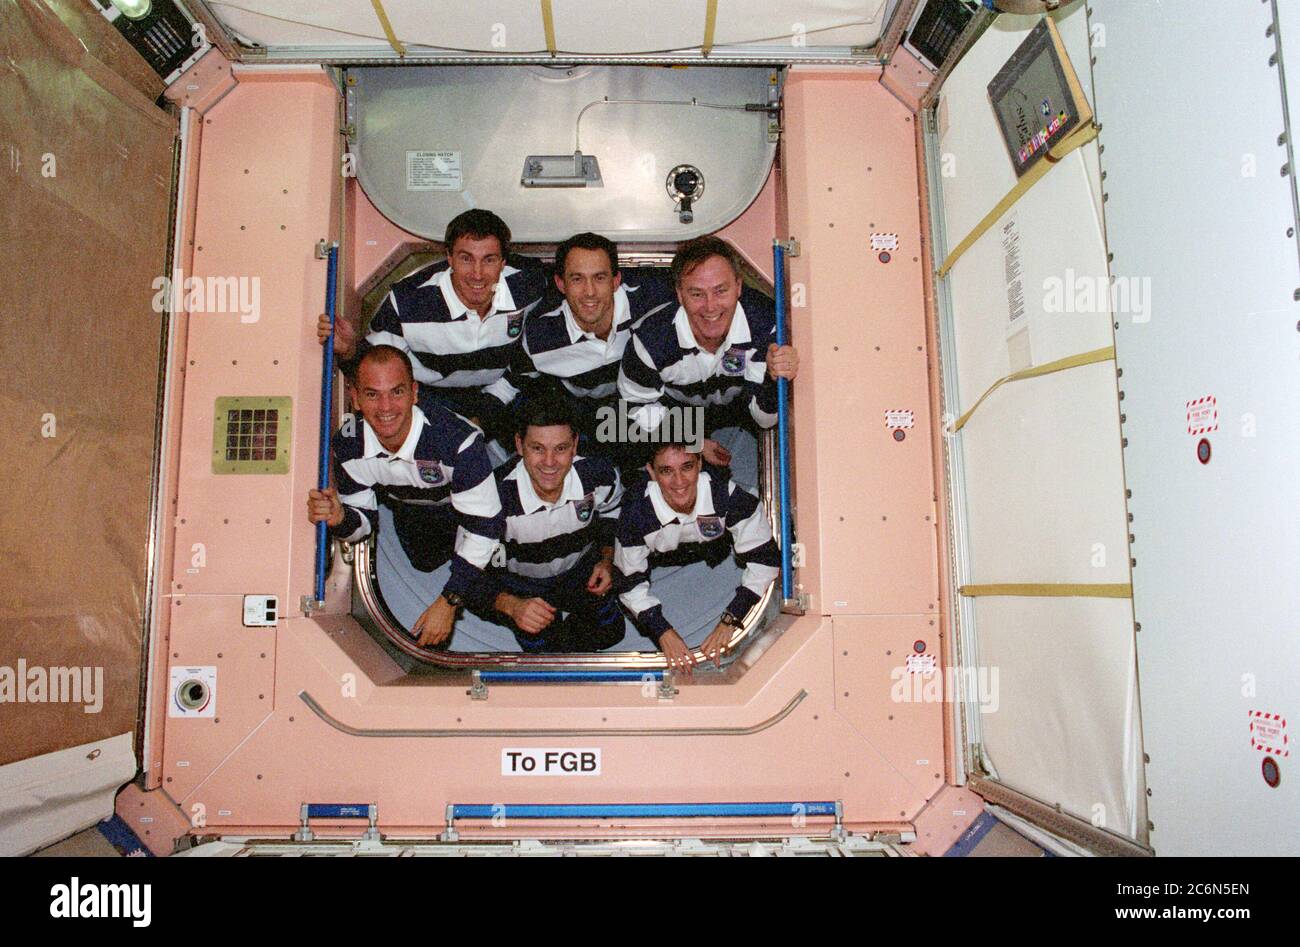 (4-15 Dec. 1998) --- The STS-88 crew members pose for the traditional inflight crew portrait in the U.S.-built Unity connecting module.  From left to right, bottom, are astronauts Frederick W. (Rick) Sturckow, pilot; Robert D. Cabana, mission commander; and Nancy  J. Currie, mission specialist.  Top row, cosmonaut Sergei K. Krikalev,  representing the Russian Space Agency, along with astronauts James H. Newman and Jerry L. Ross, all mission specialists. Stock Photo